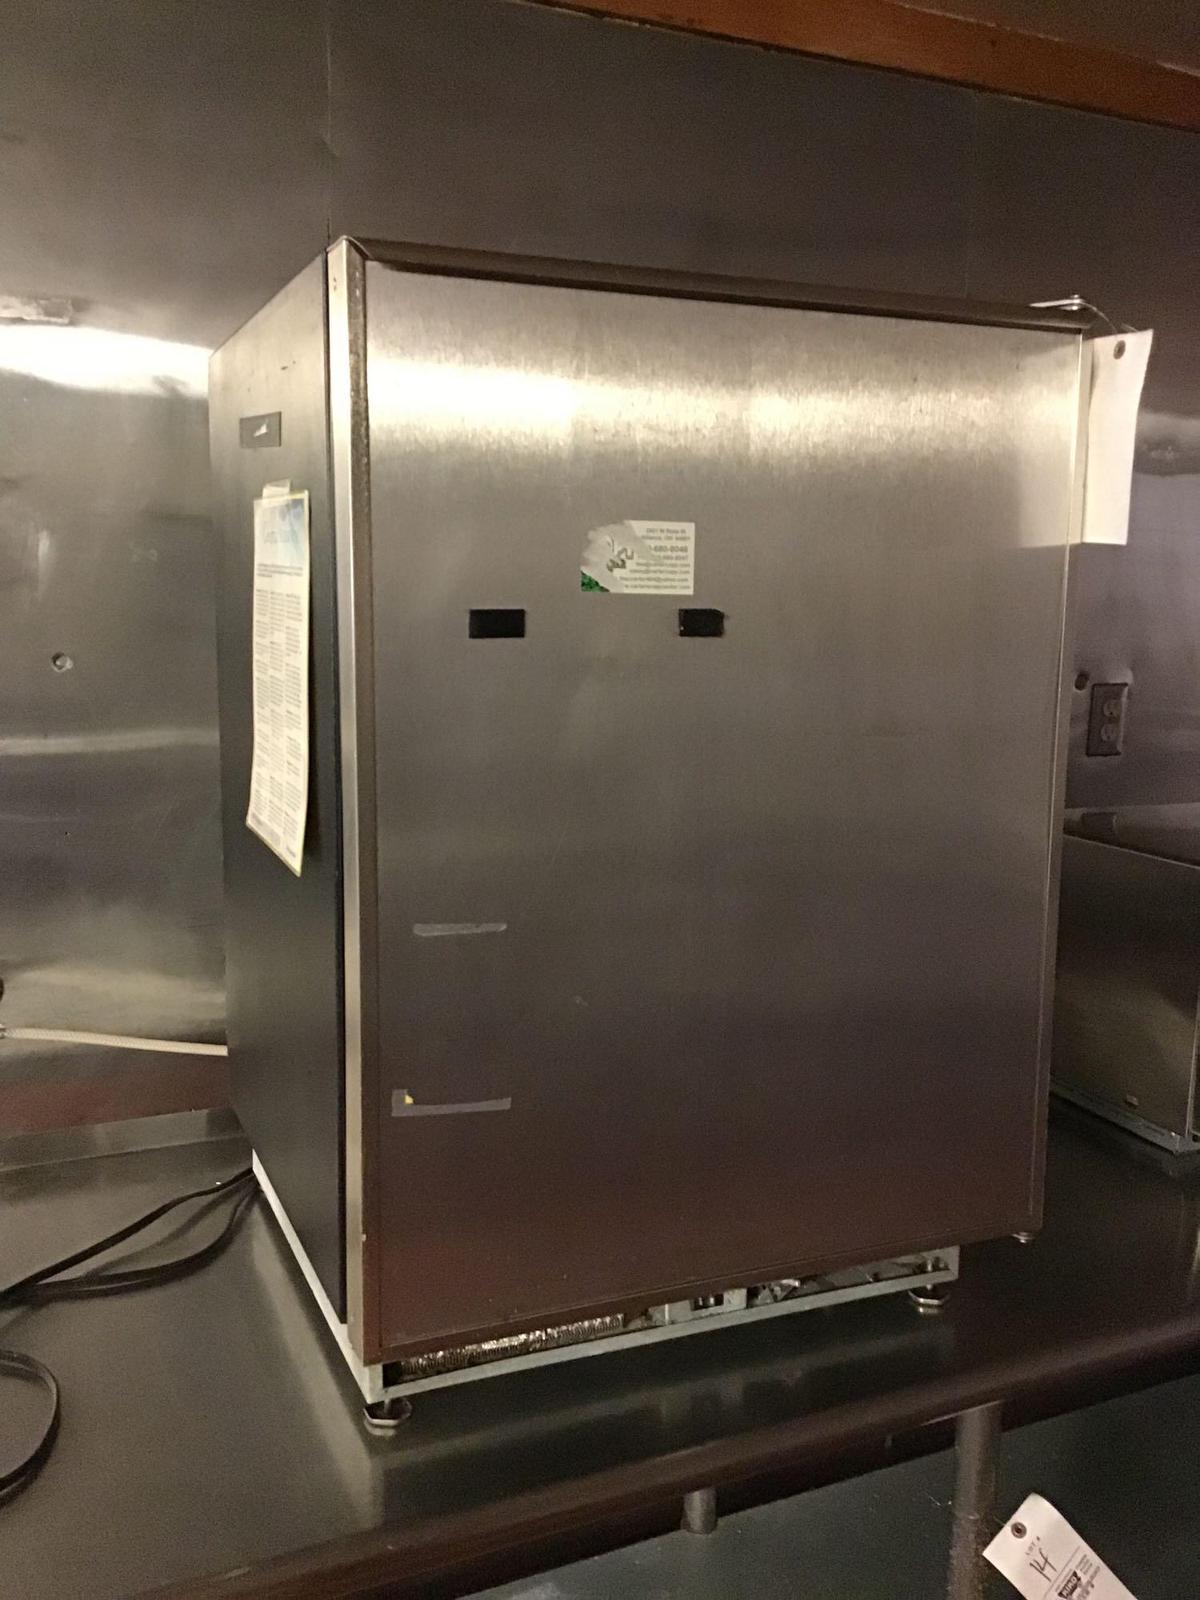 Small stainless steel front freezer with ice maker.